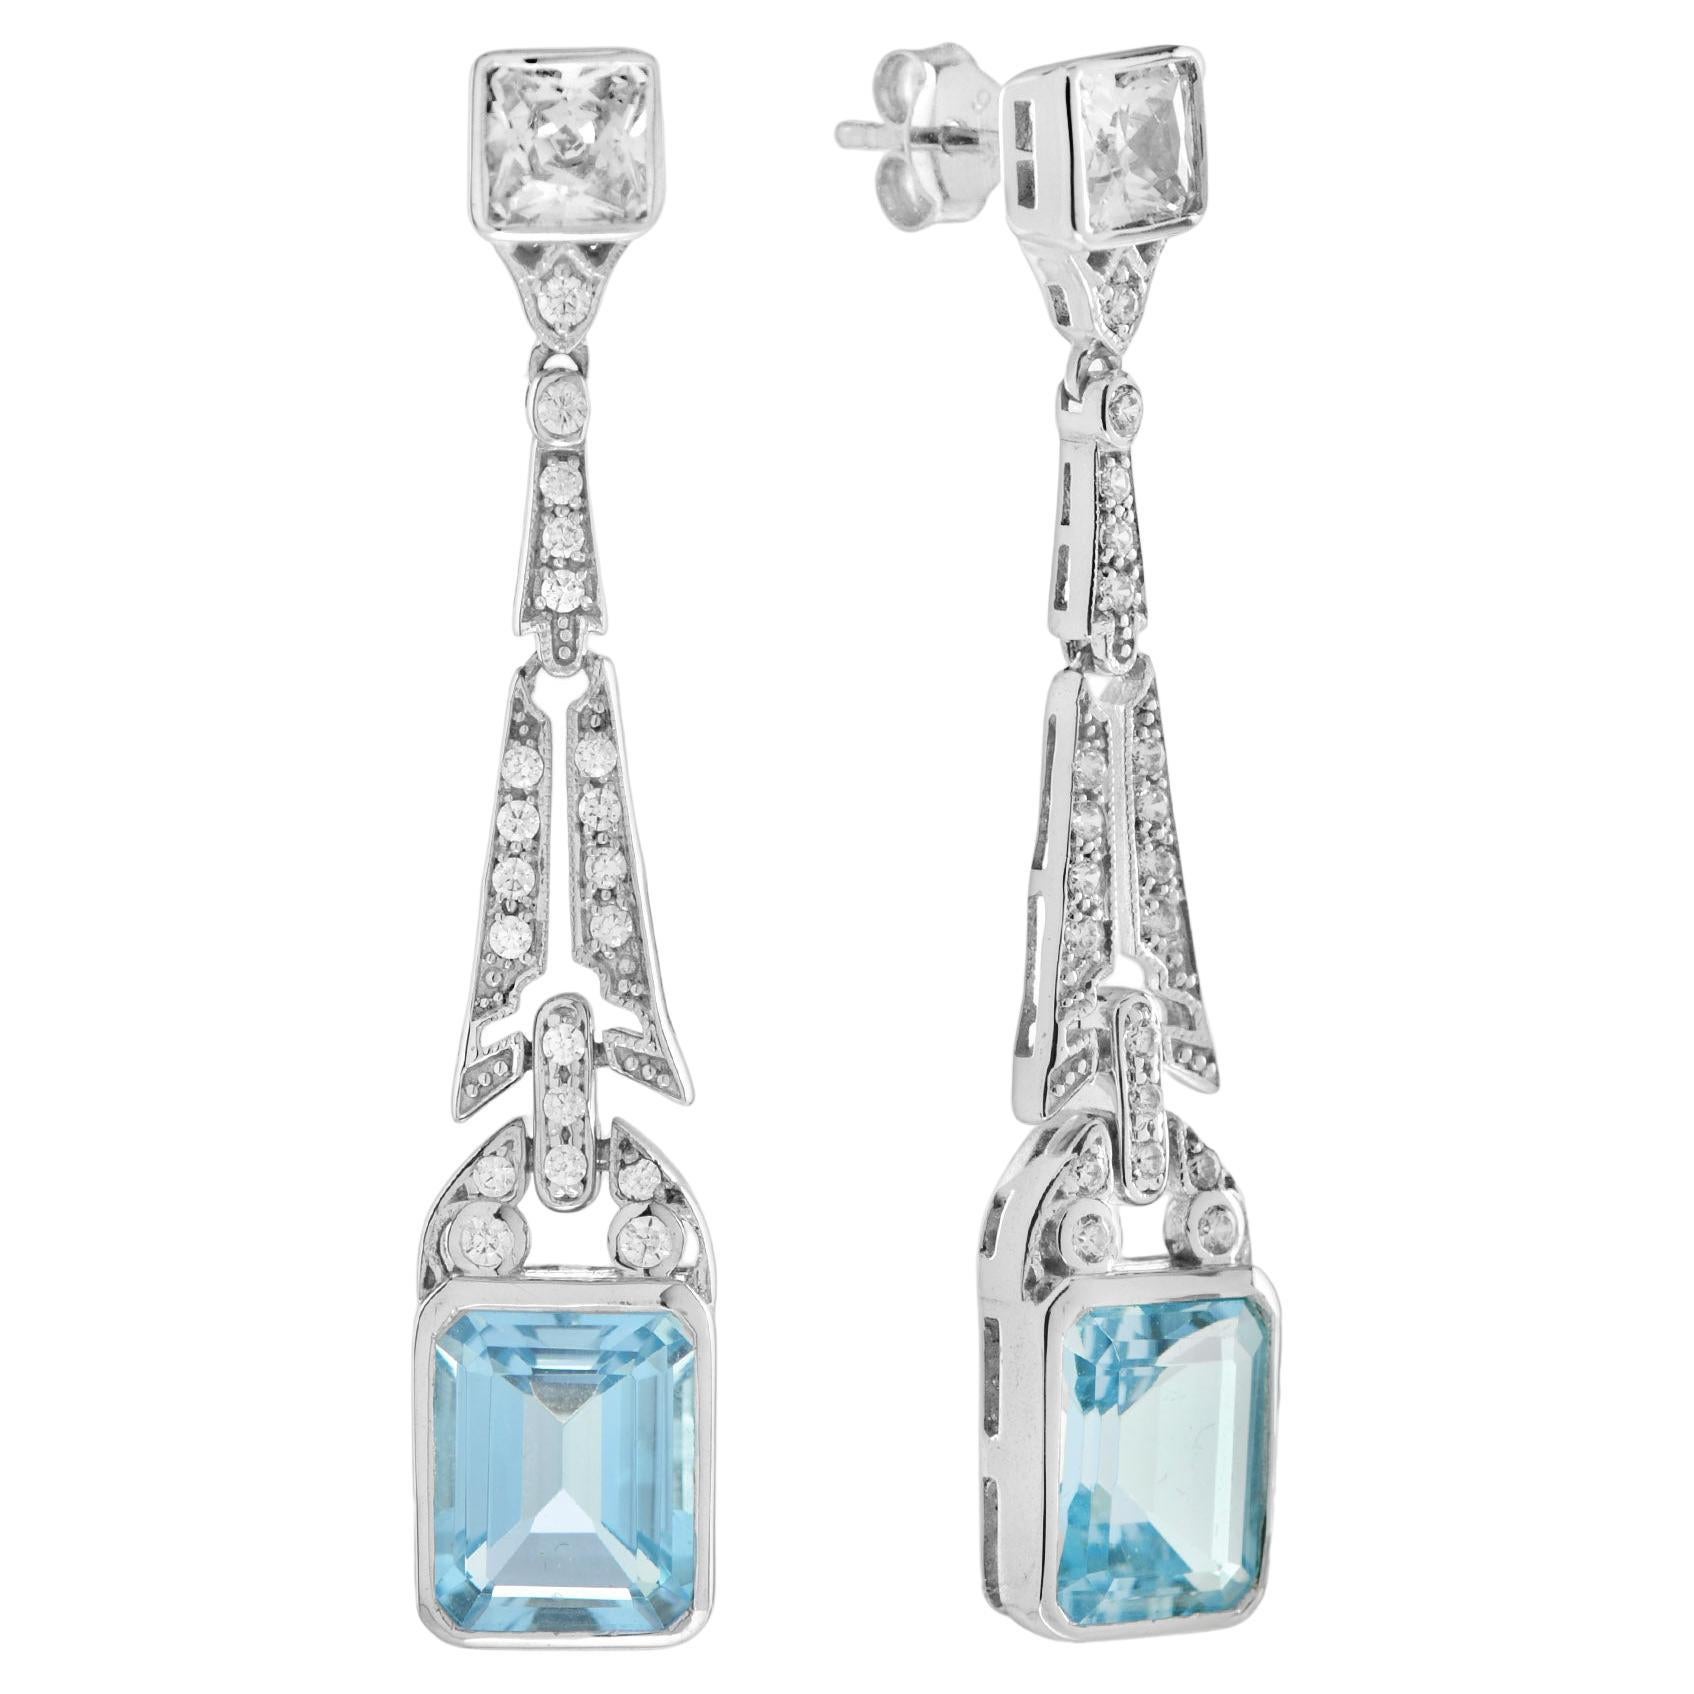 London Blue Topaz Drop Earrings in White Gold, 14.39 Carats Total For ...